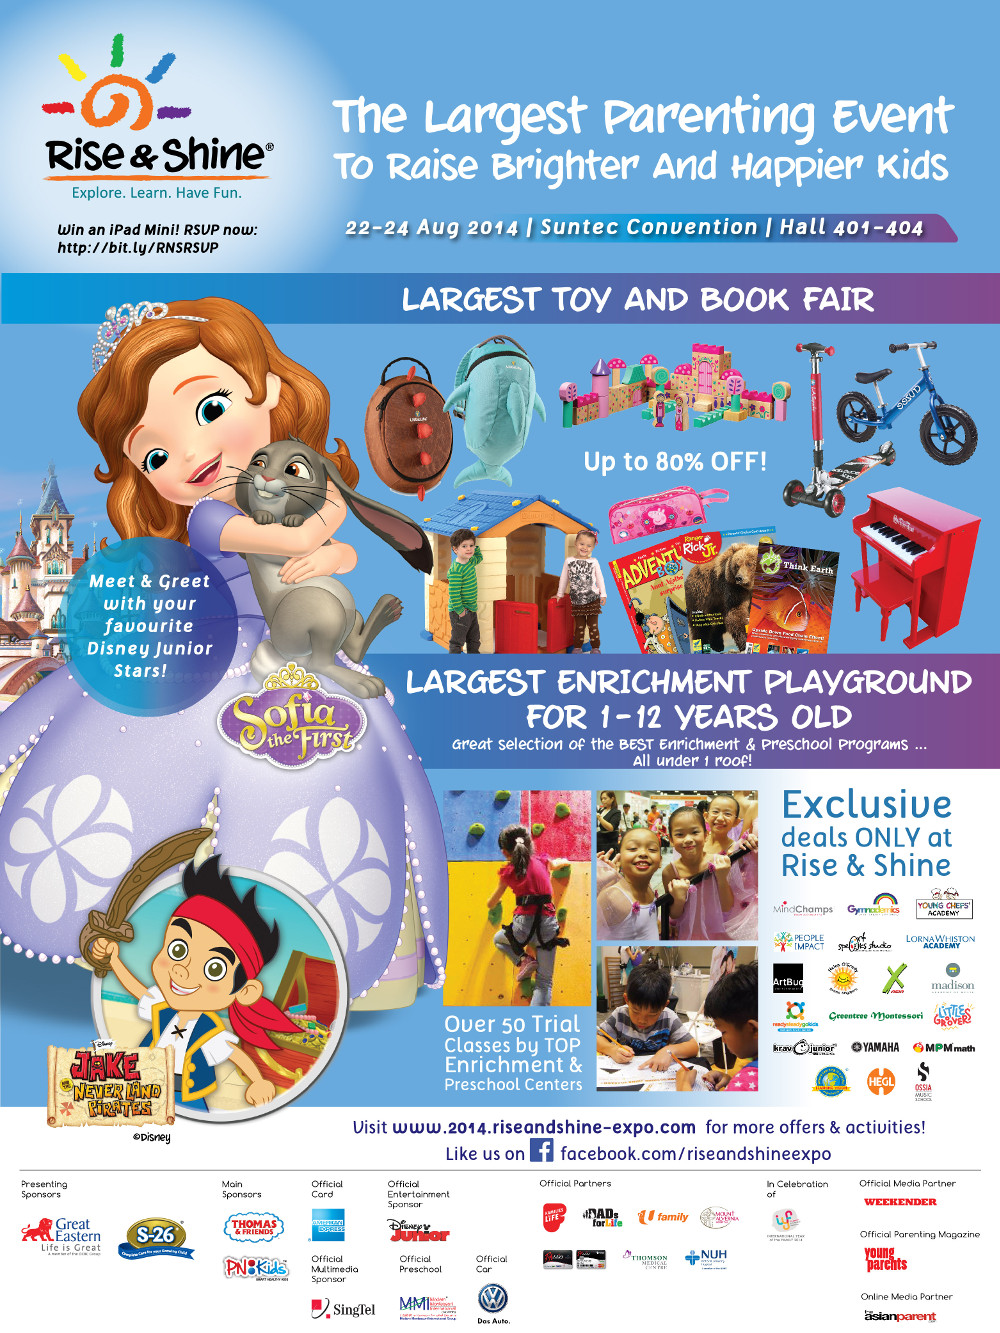 The Largest Parenting Event To Raise Brighter and Happier Kids from 22 to 24 Aug 2014 at Suntec Convection Hall 401-404. Largest Toy and Book Fair at Up to 80% OFF!. Meet & Greet with your favourite Disney Junior Stars!. Largest Enrichment Playground for 1-12 Year Old. Exclusive deals ONLY at Rise & Shine.